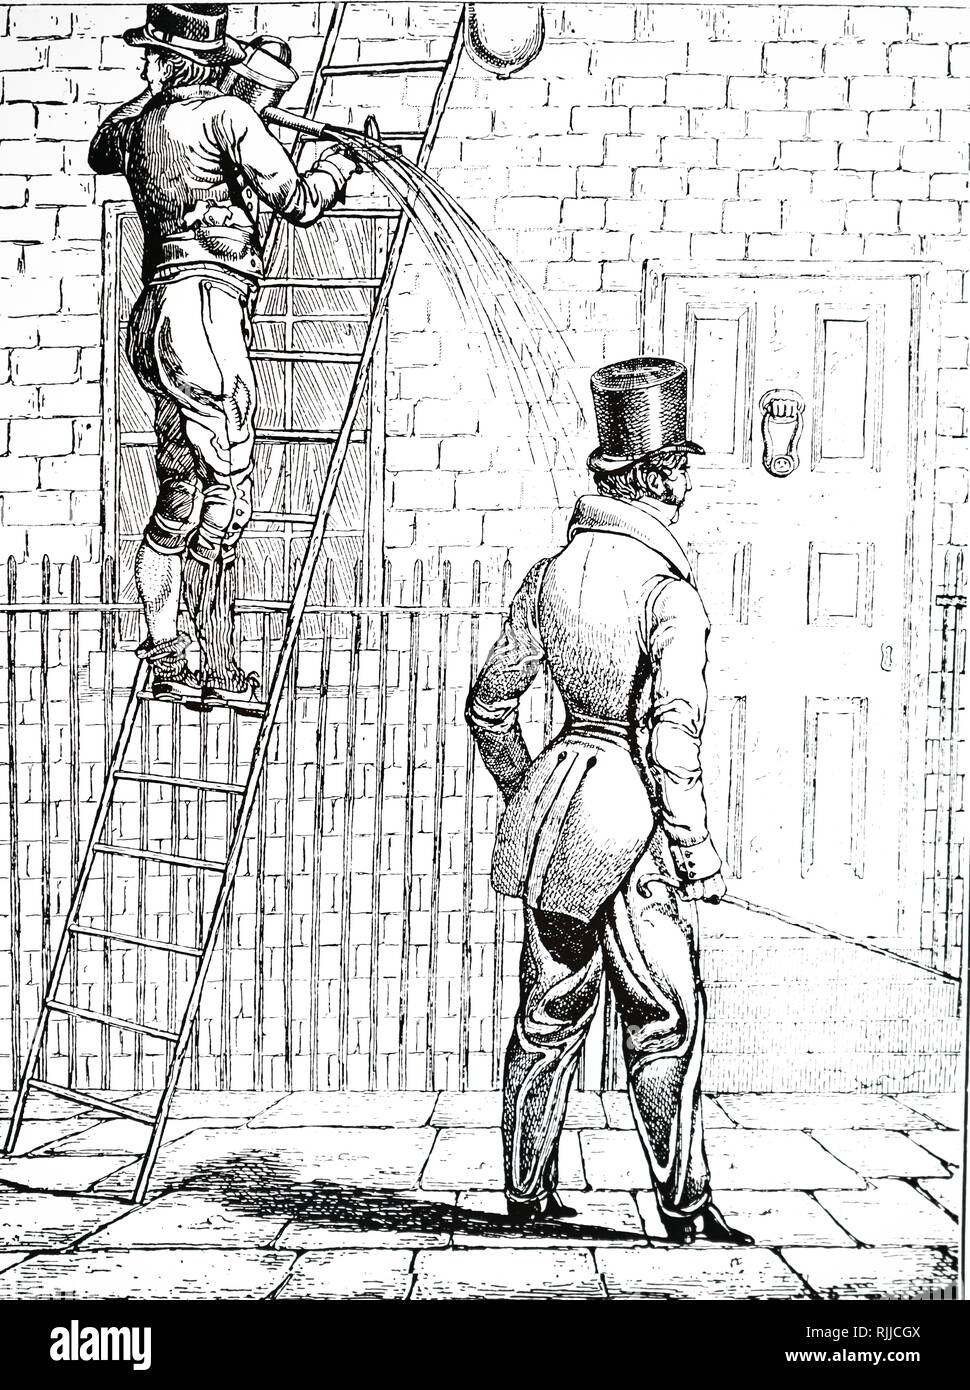 A cartoon commenting on the advantages of gas lighting over oil. Illustrated by Richard Dighton (1795-1880) an English artist in the Regency period. Dated 19th century Stock Photo